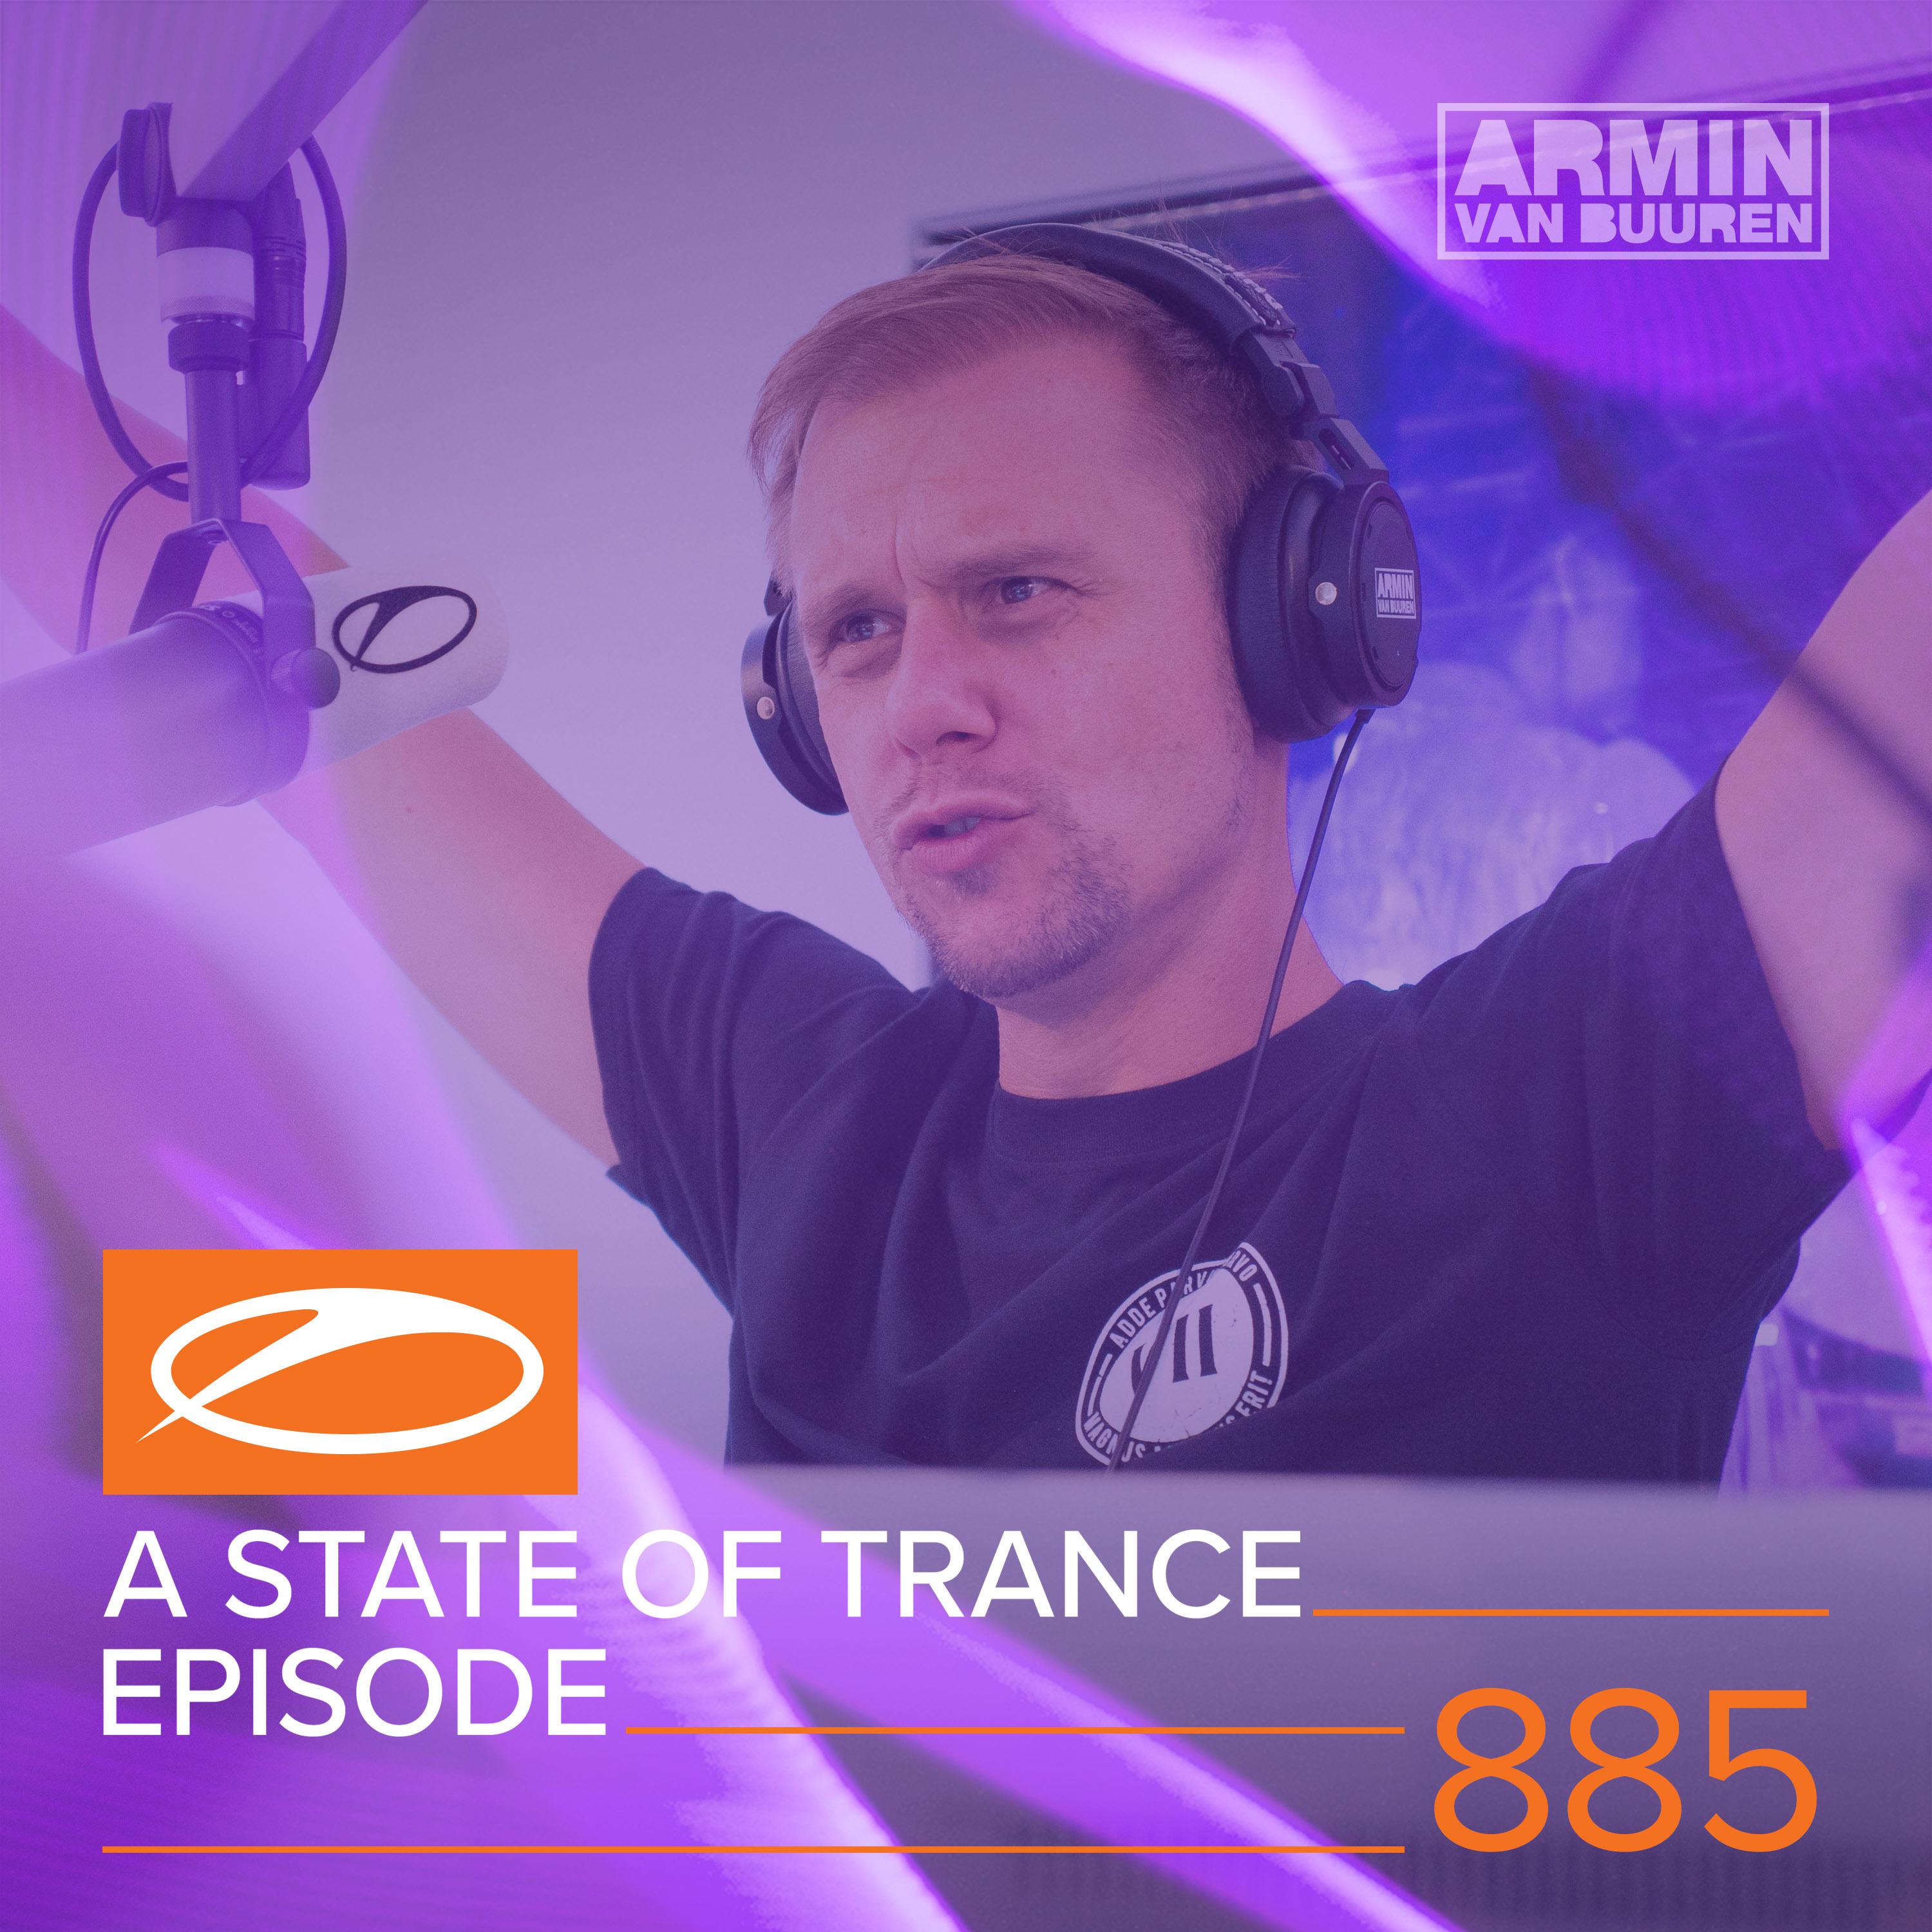 A State Of Trance (ASOT 885) (Outro)